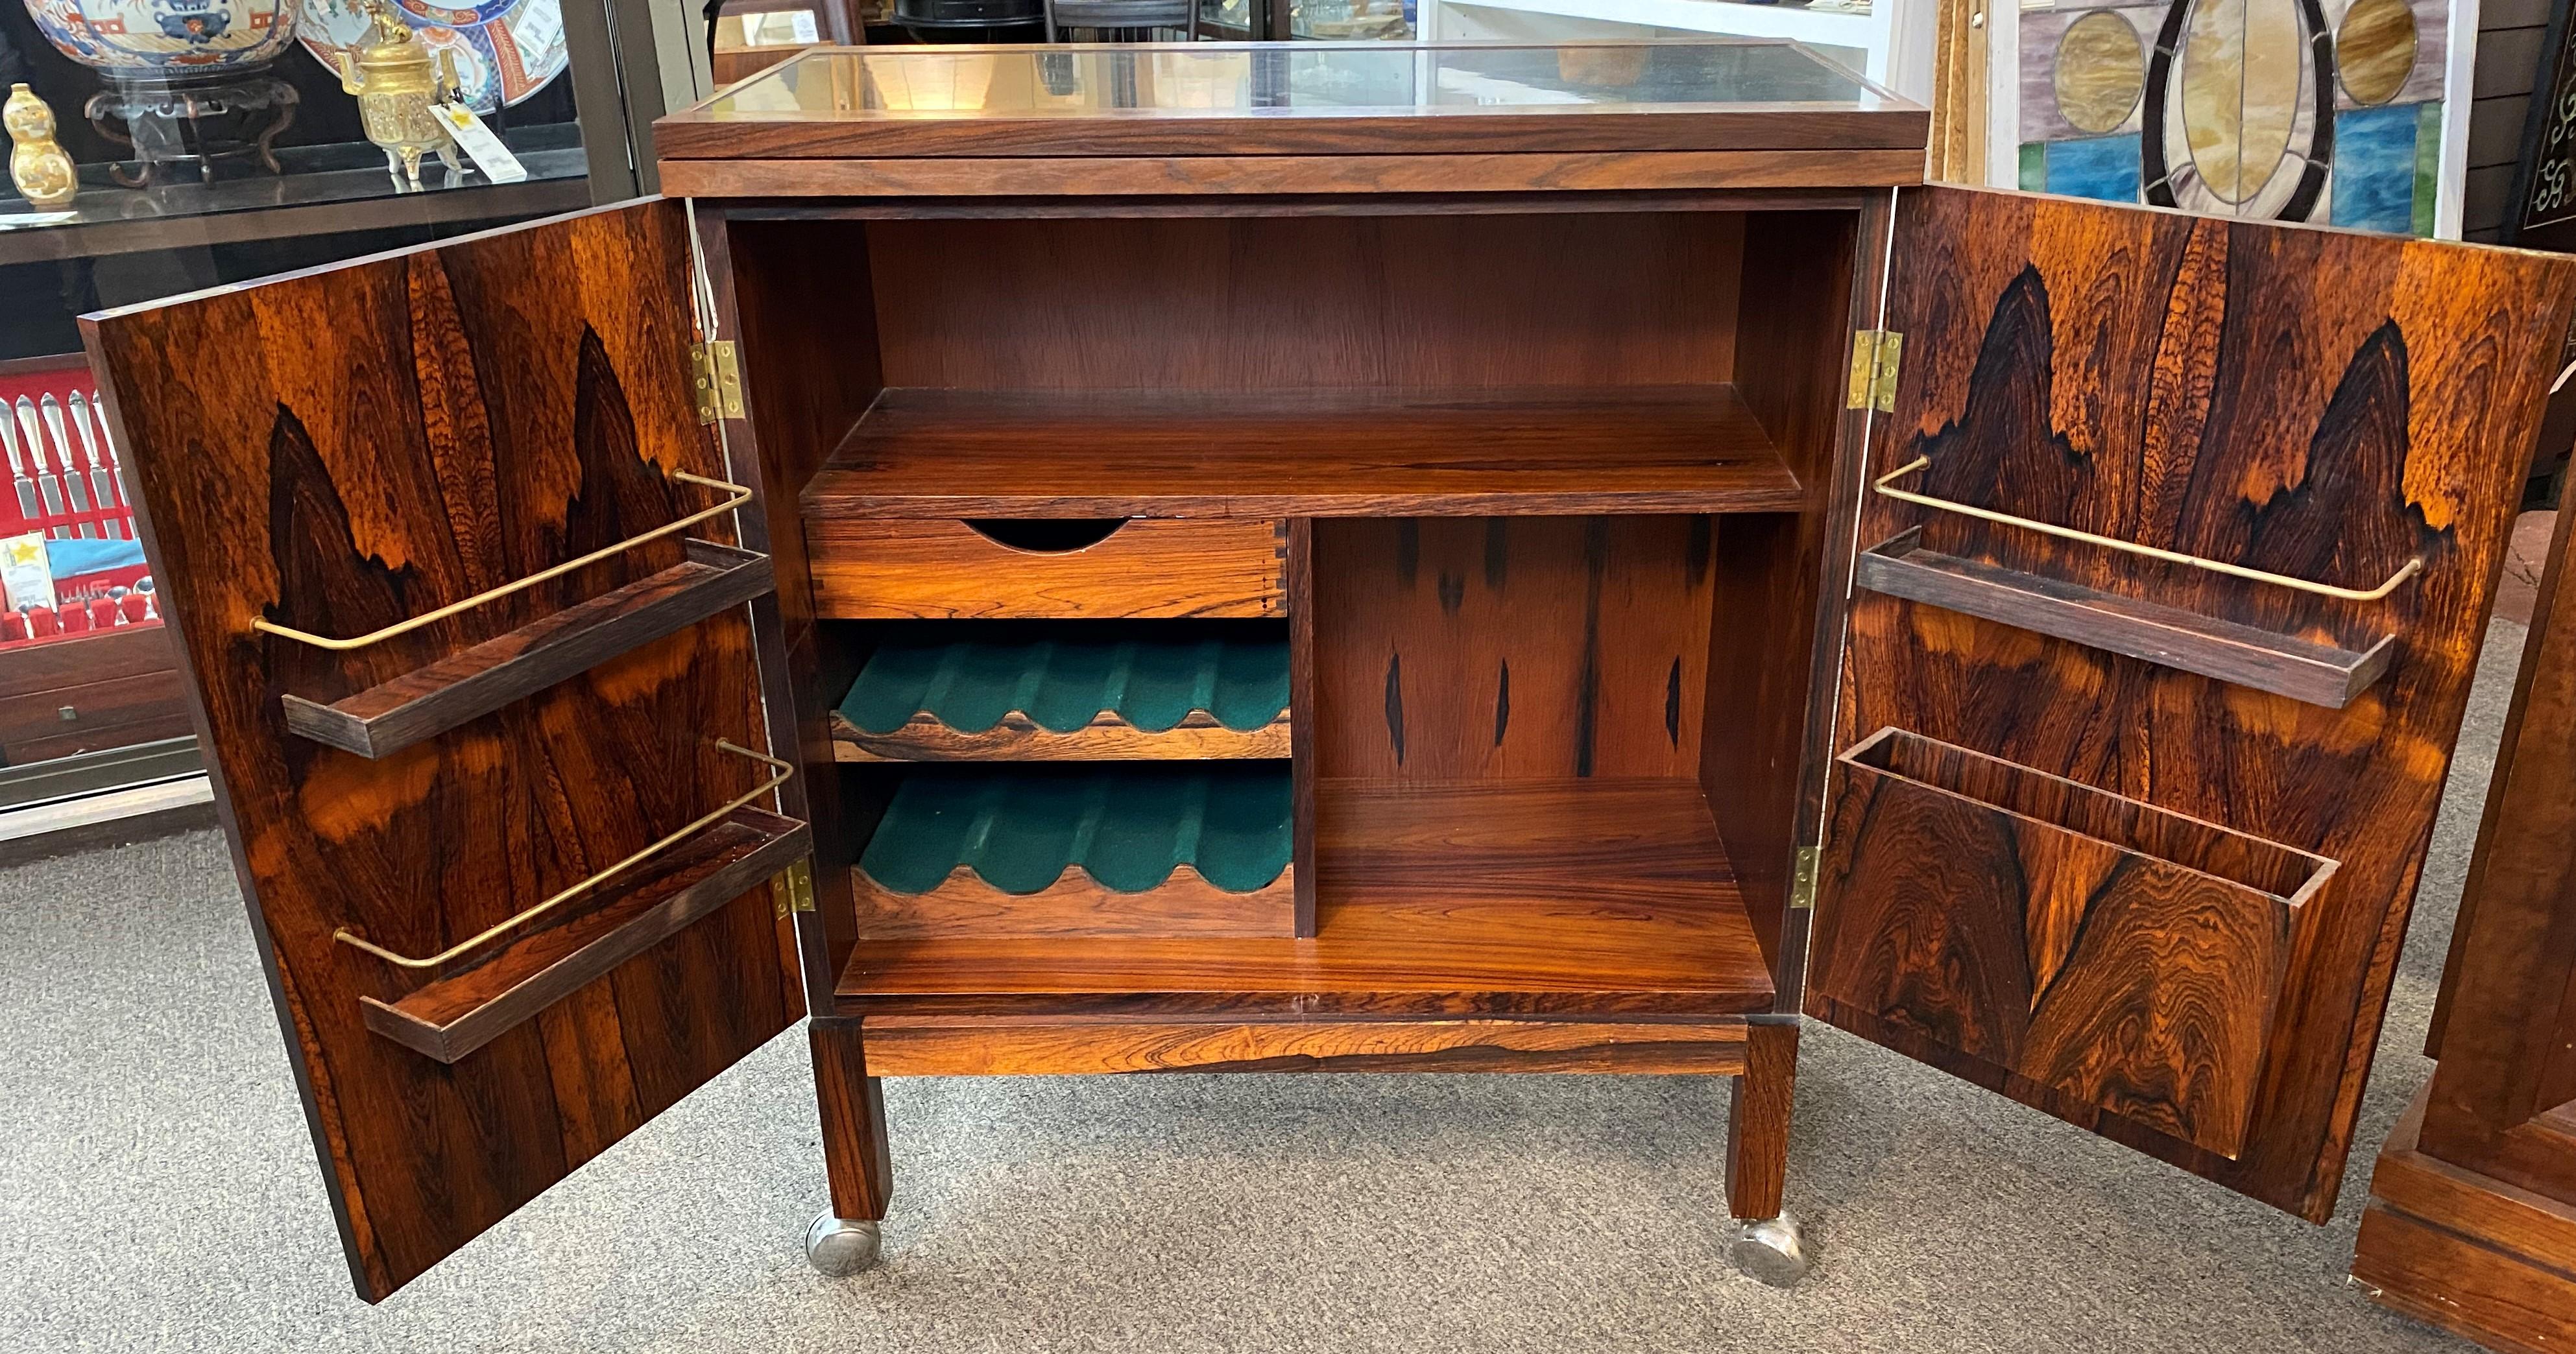 A fine Mid-Century Modern “flip top” rosewood, bar cabinet/ cart by Torbjorn Afdal for Mellemstrands Trevareindustri / Bruksbo Modell of Norway, featuring richly grained rosewood, with a fully finished back and rosewood interior. The finished back